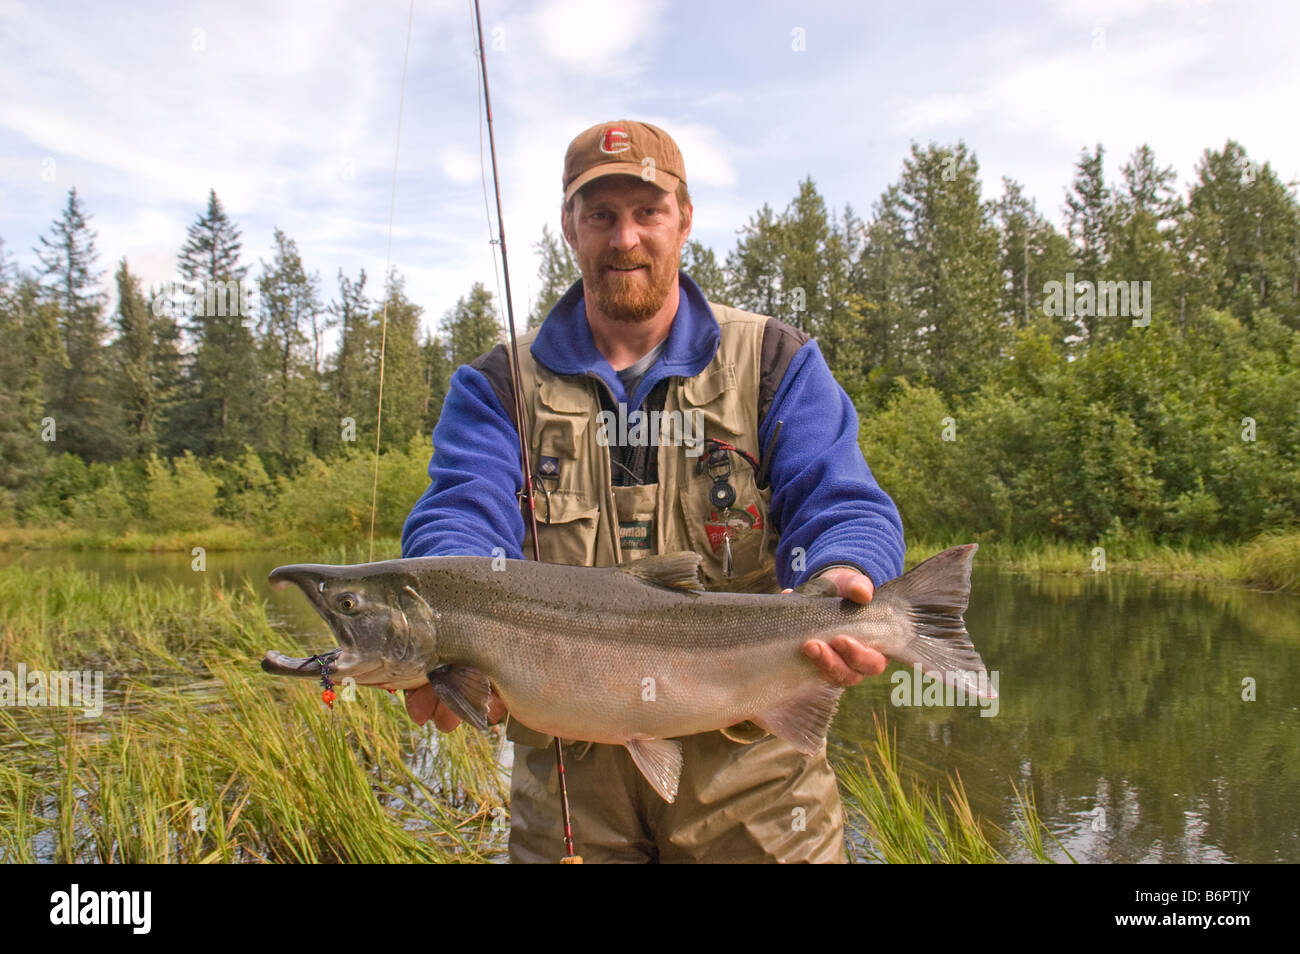 Angler with a Silver salmon caught on the Robe River near Valdez